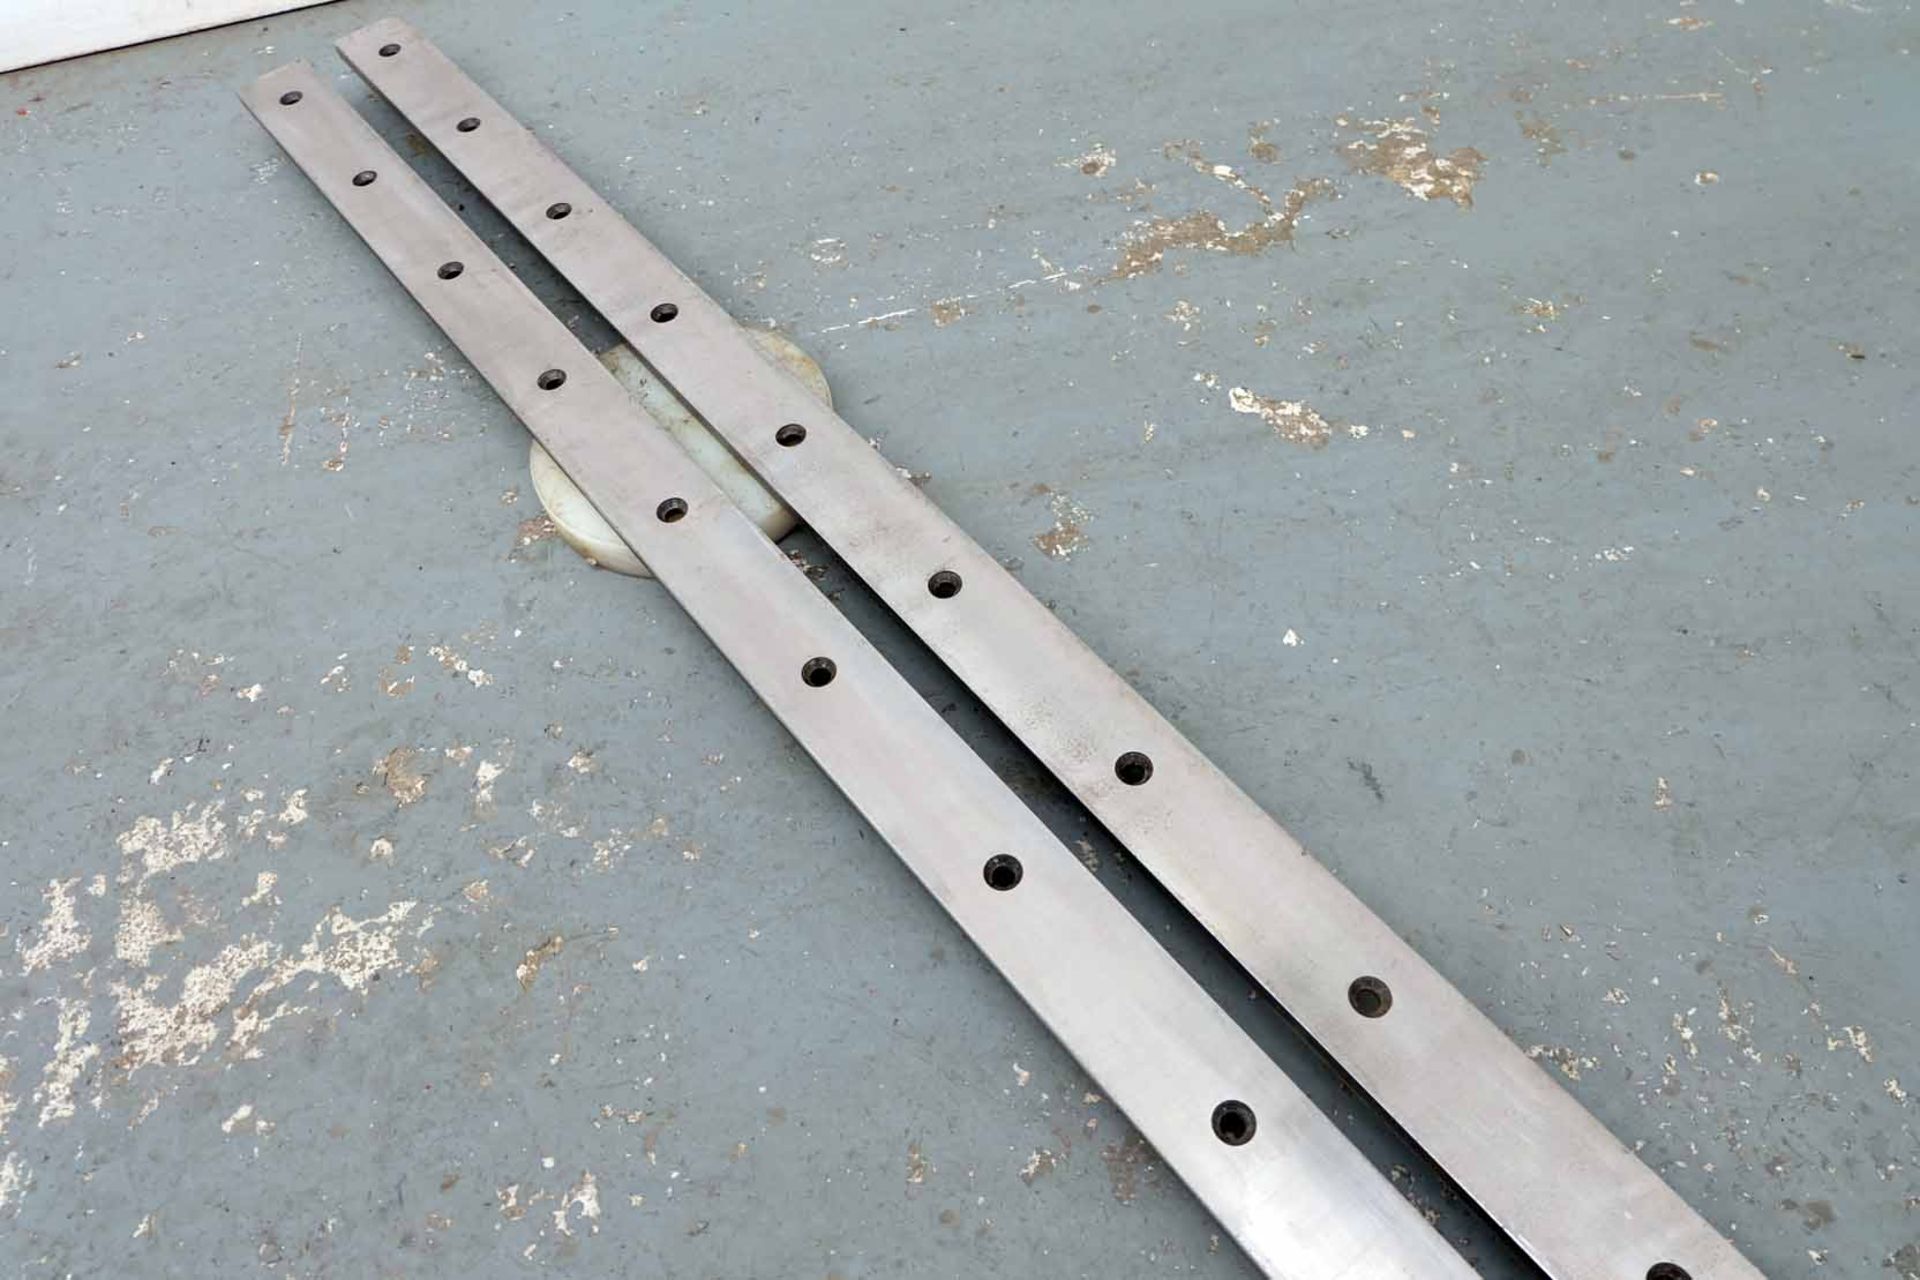 Pair of Guillotine Blades. Length 2542mm. Dimensions 62mm x 14mm. 17 Holes Counter Sunk Both Sides. - Image 4 of 6